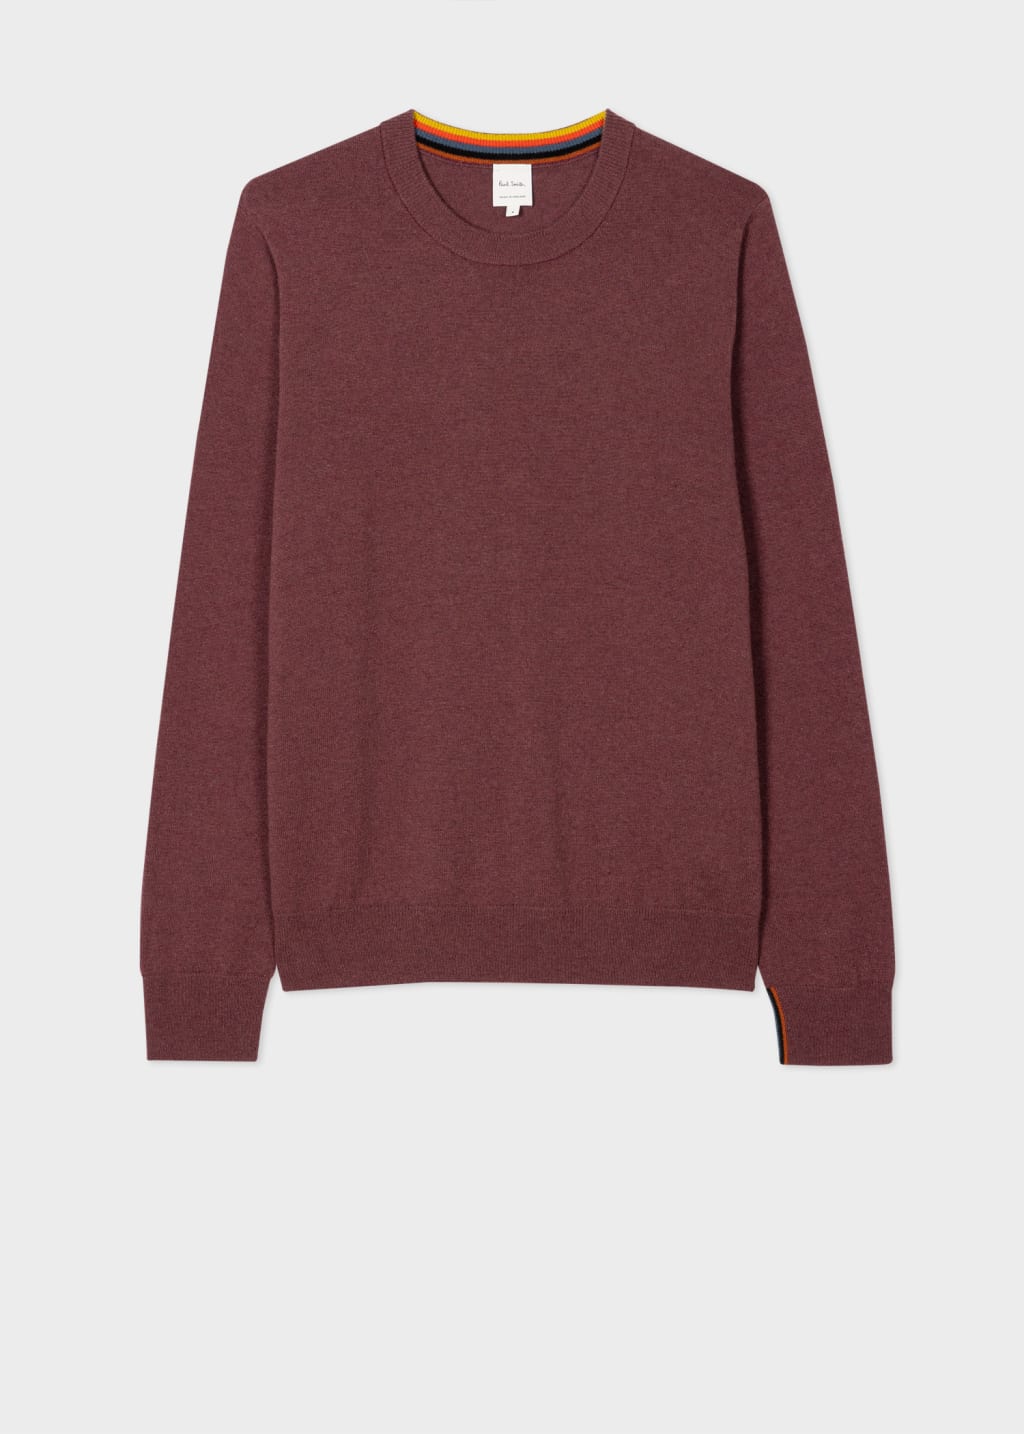 Front View - Plum Cashmere Crew Neck Sweater Paul Smith